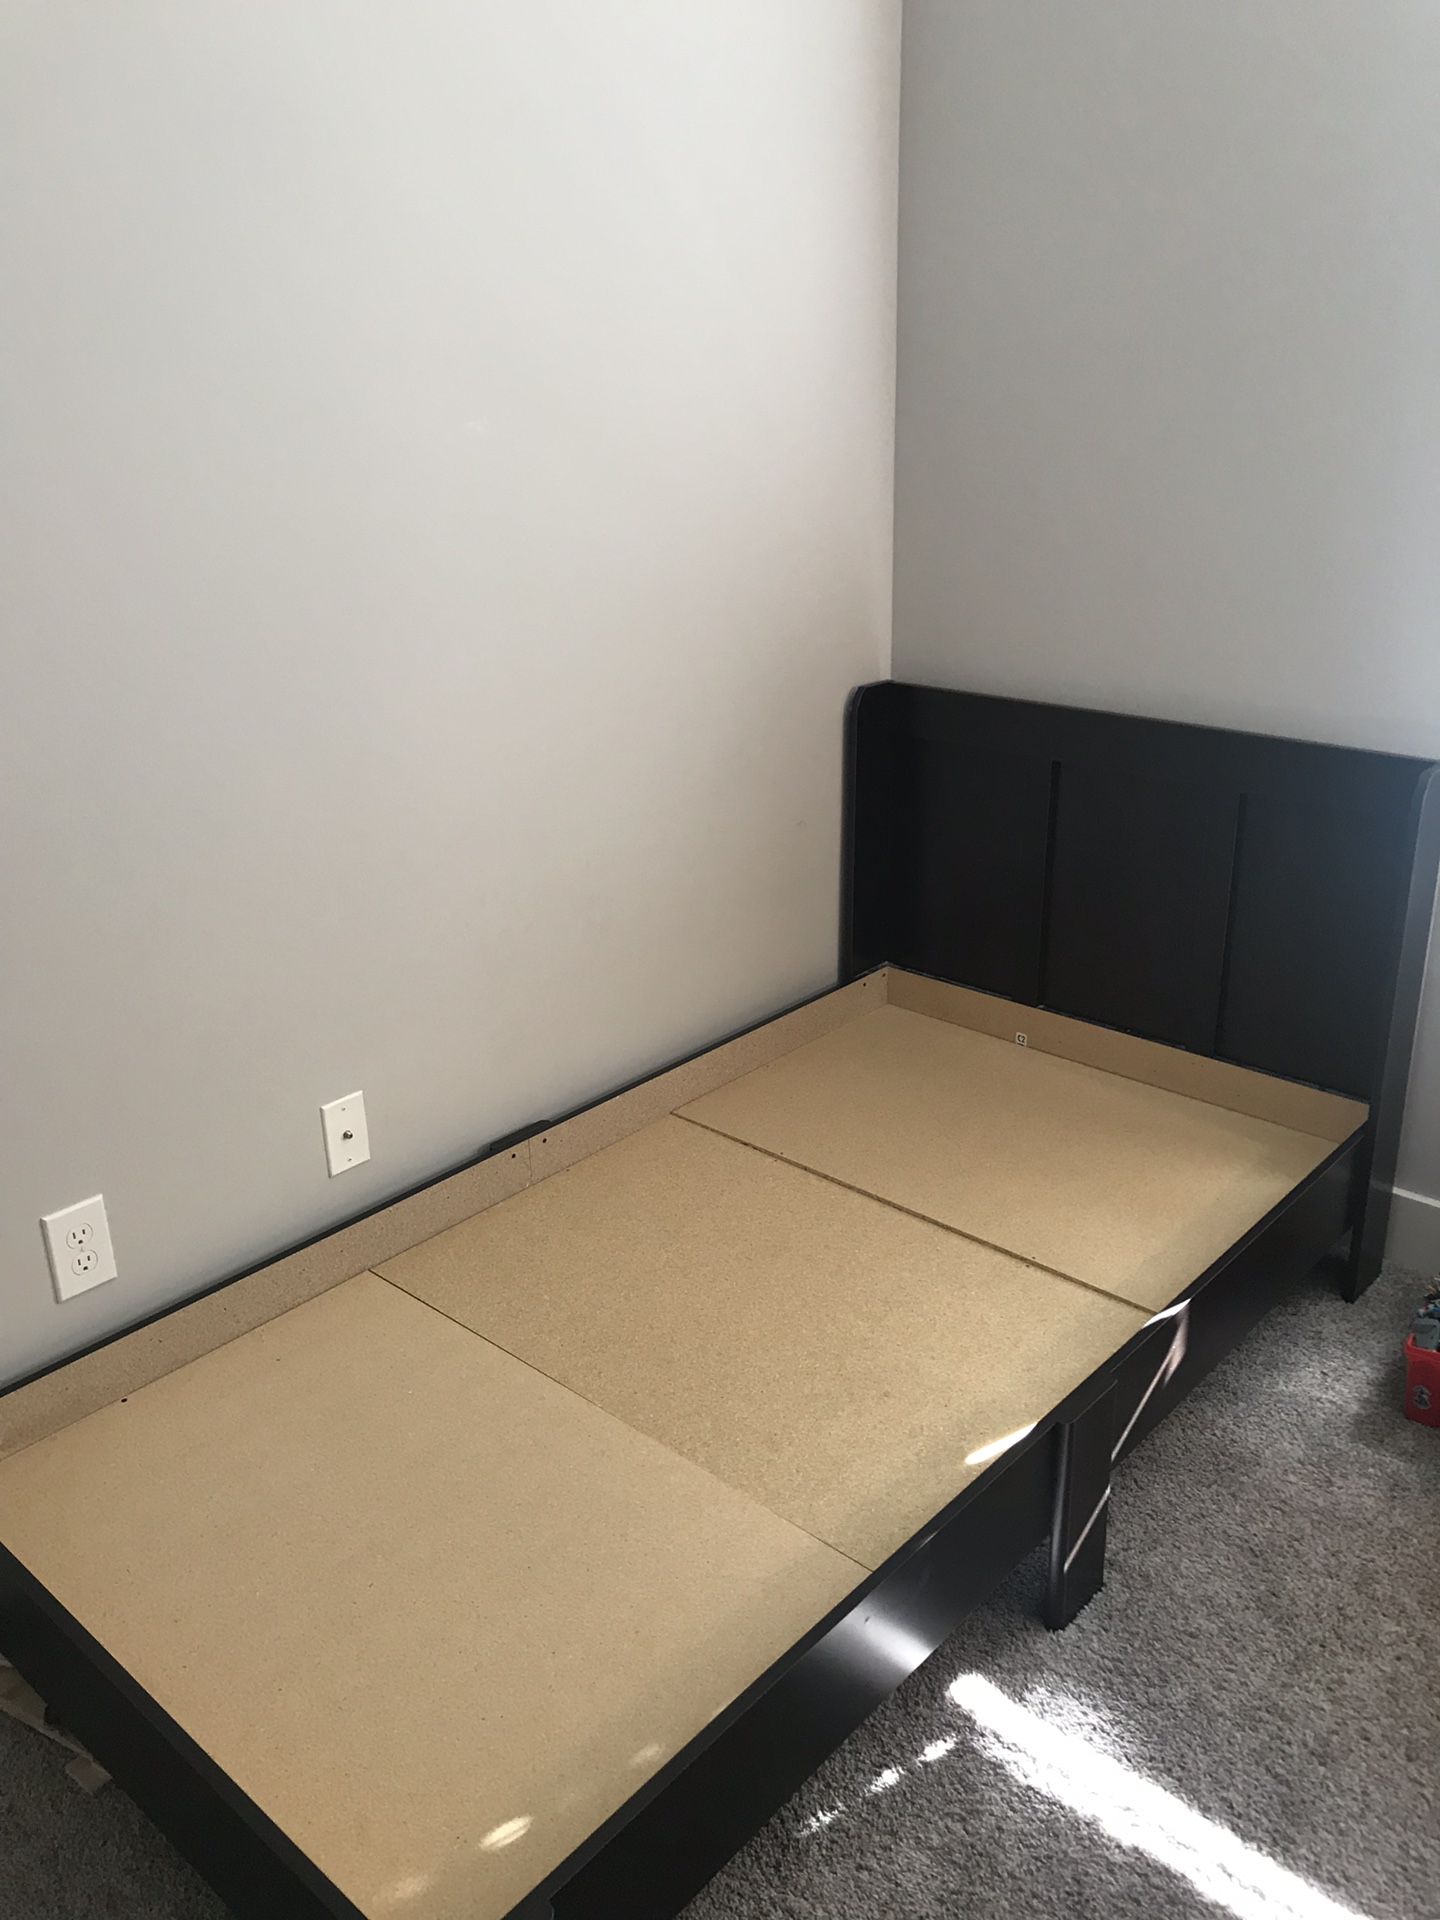 Twin Bed—moving sale